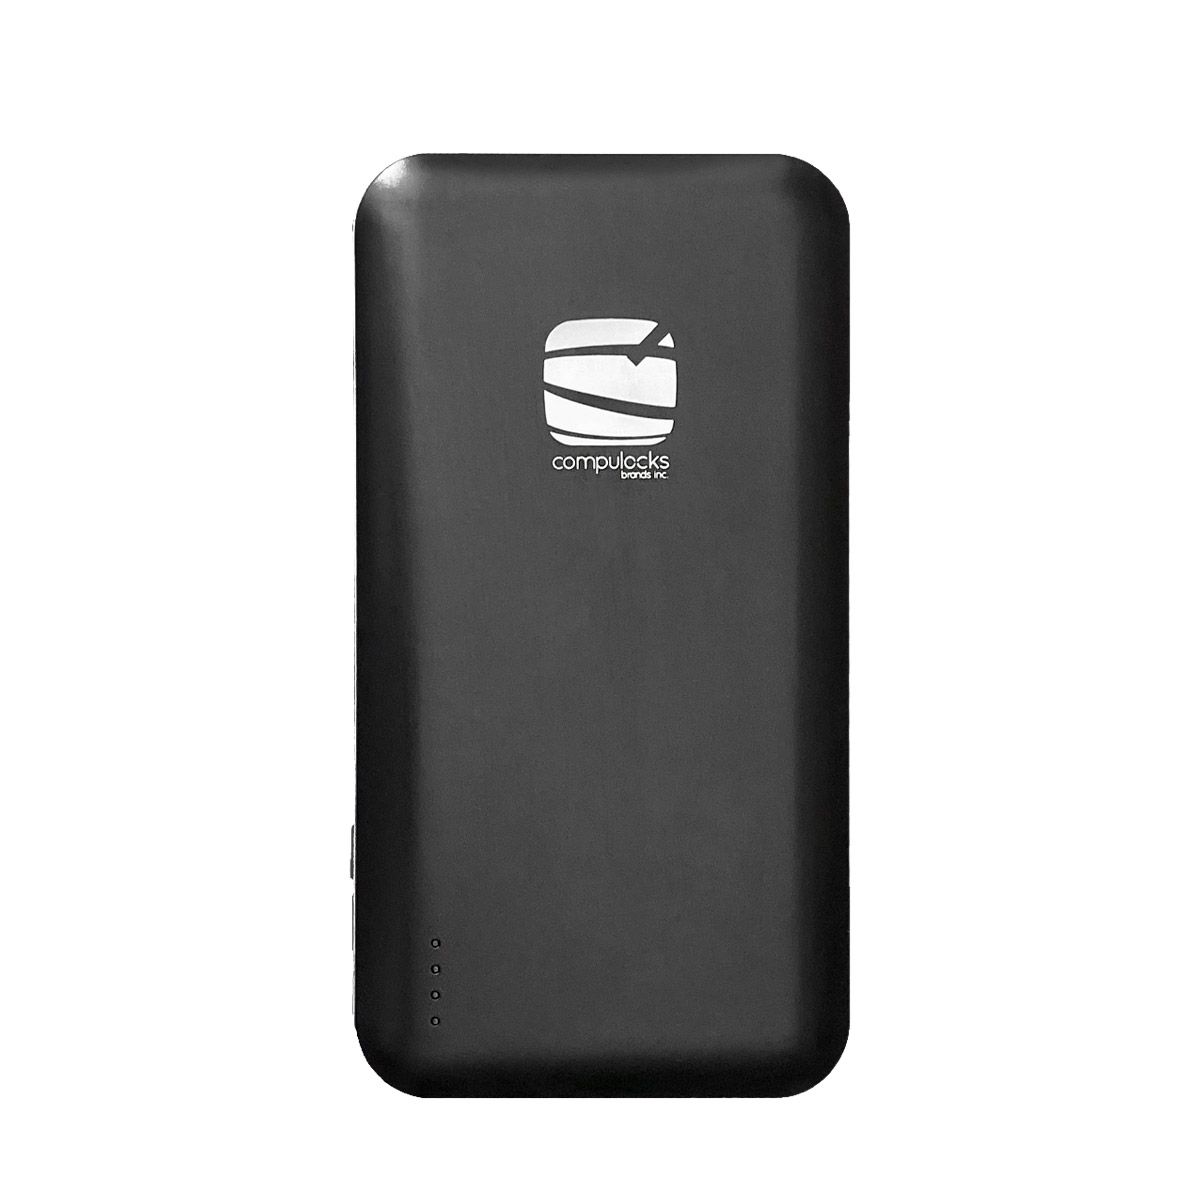 Tablet / Smartphone Battery Pack and Charger 10,000 mAh